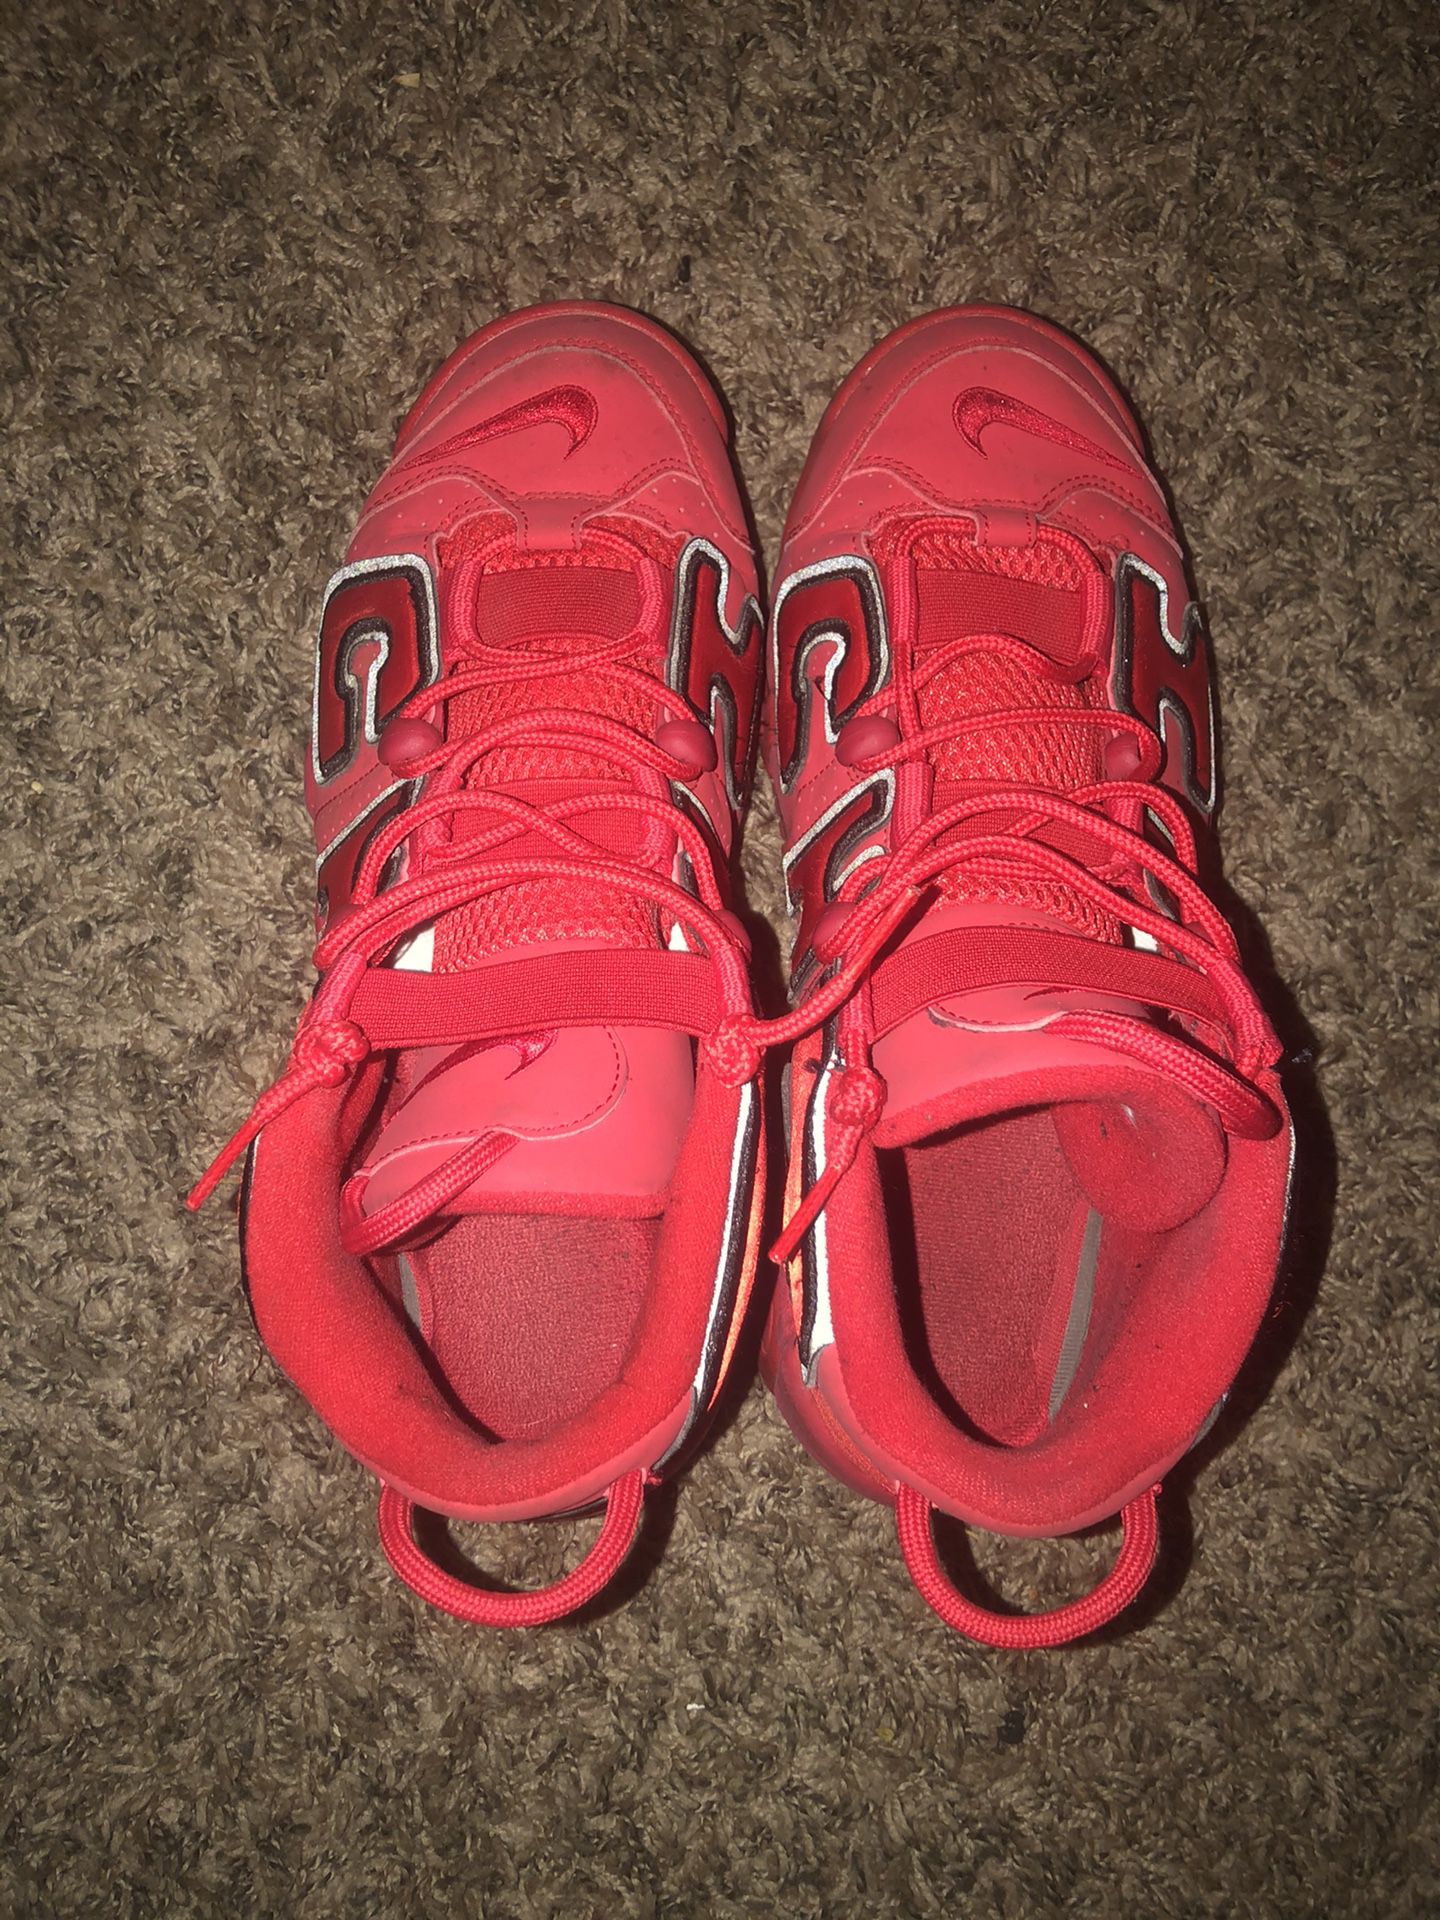 The "Chi" Uptempo's *LIMITED T ONLY*